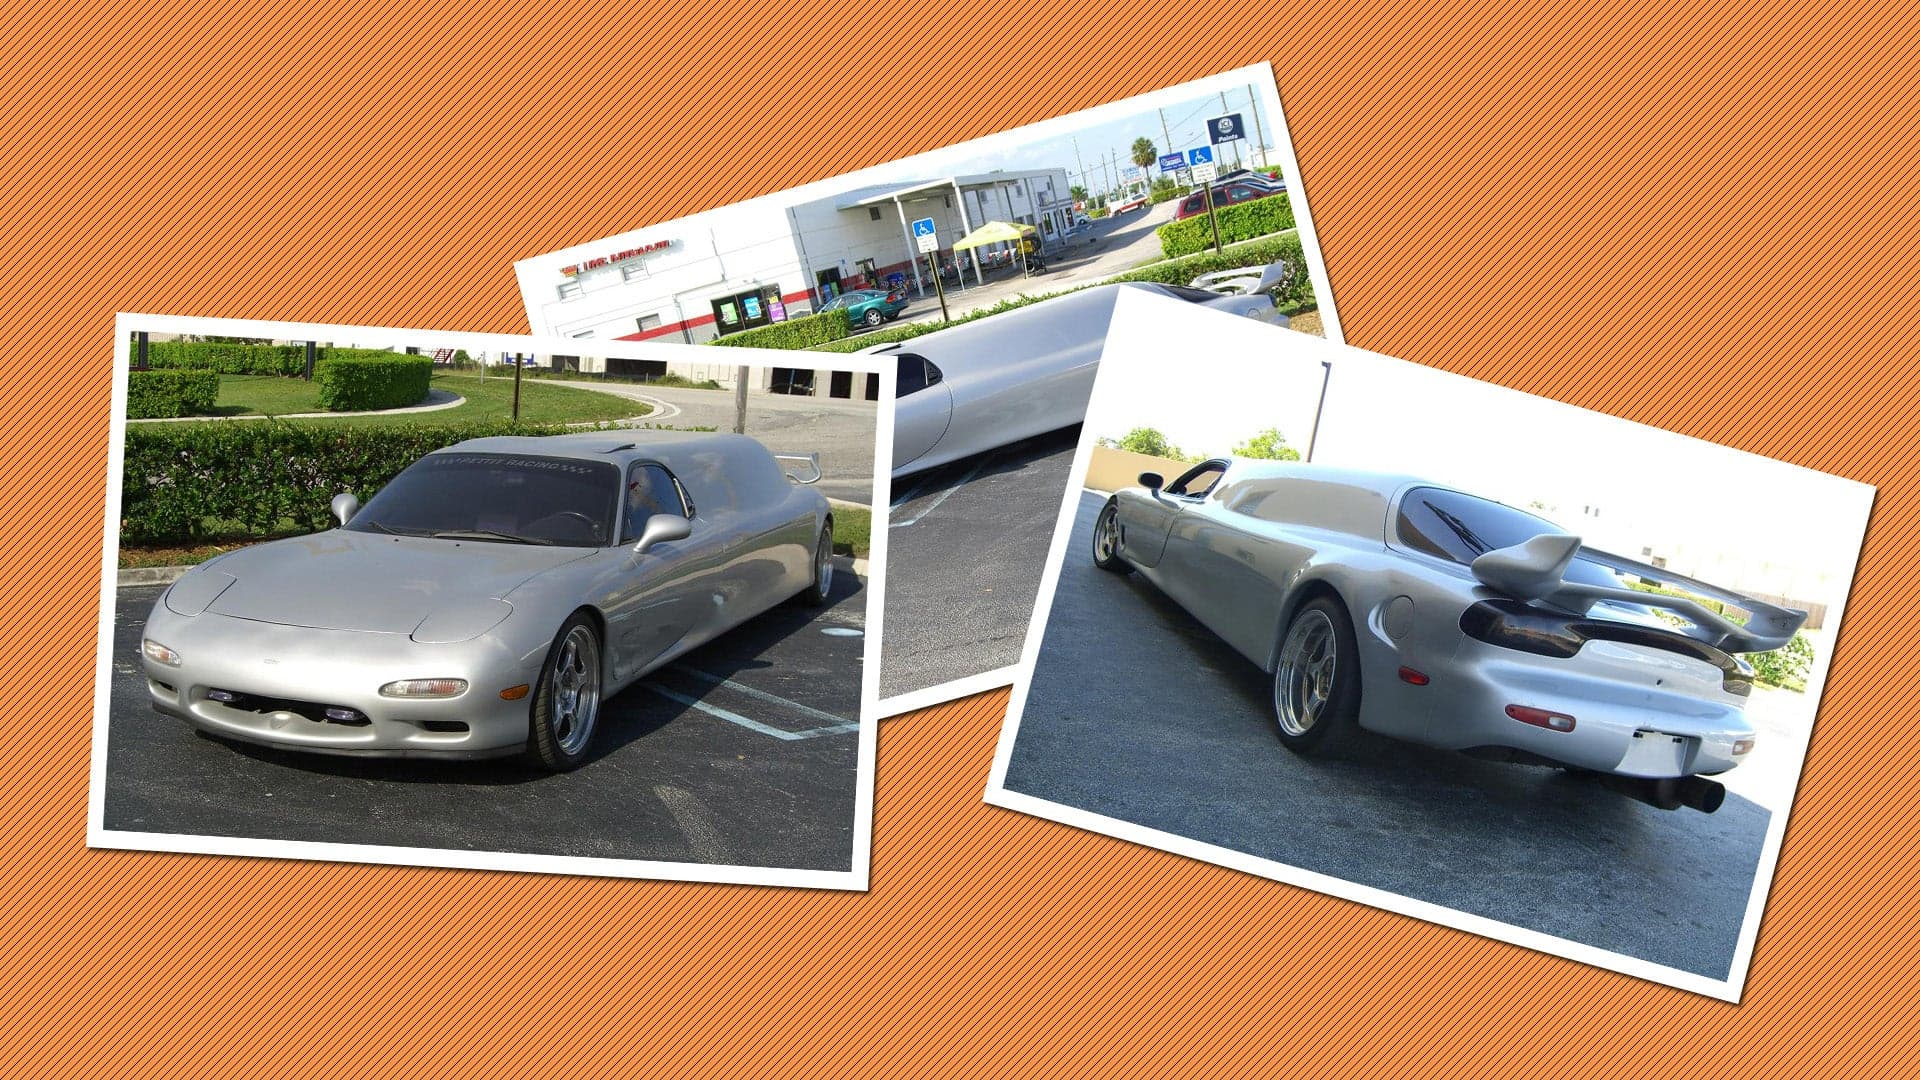 This FD RX-7 is the Limousine Every Car Guy Wants at His Wedding